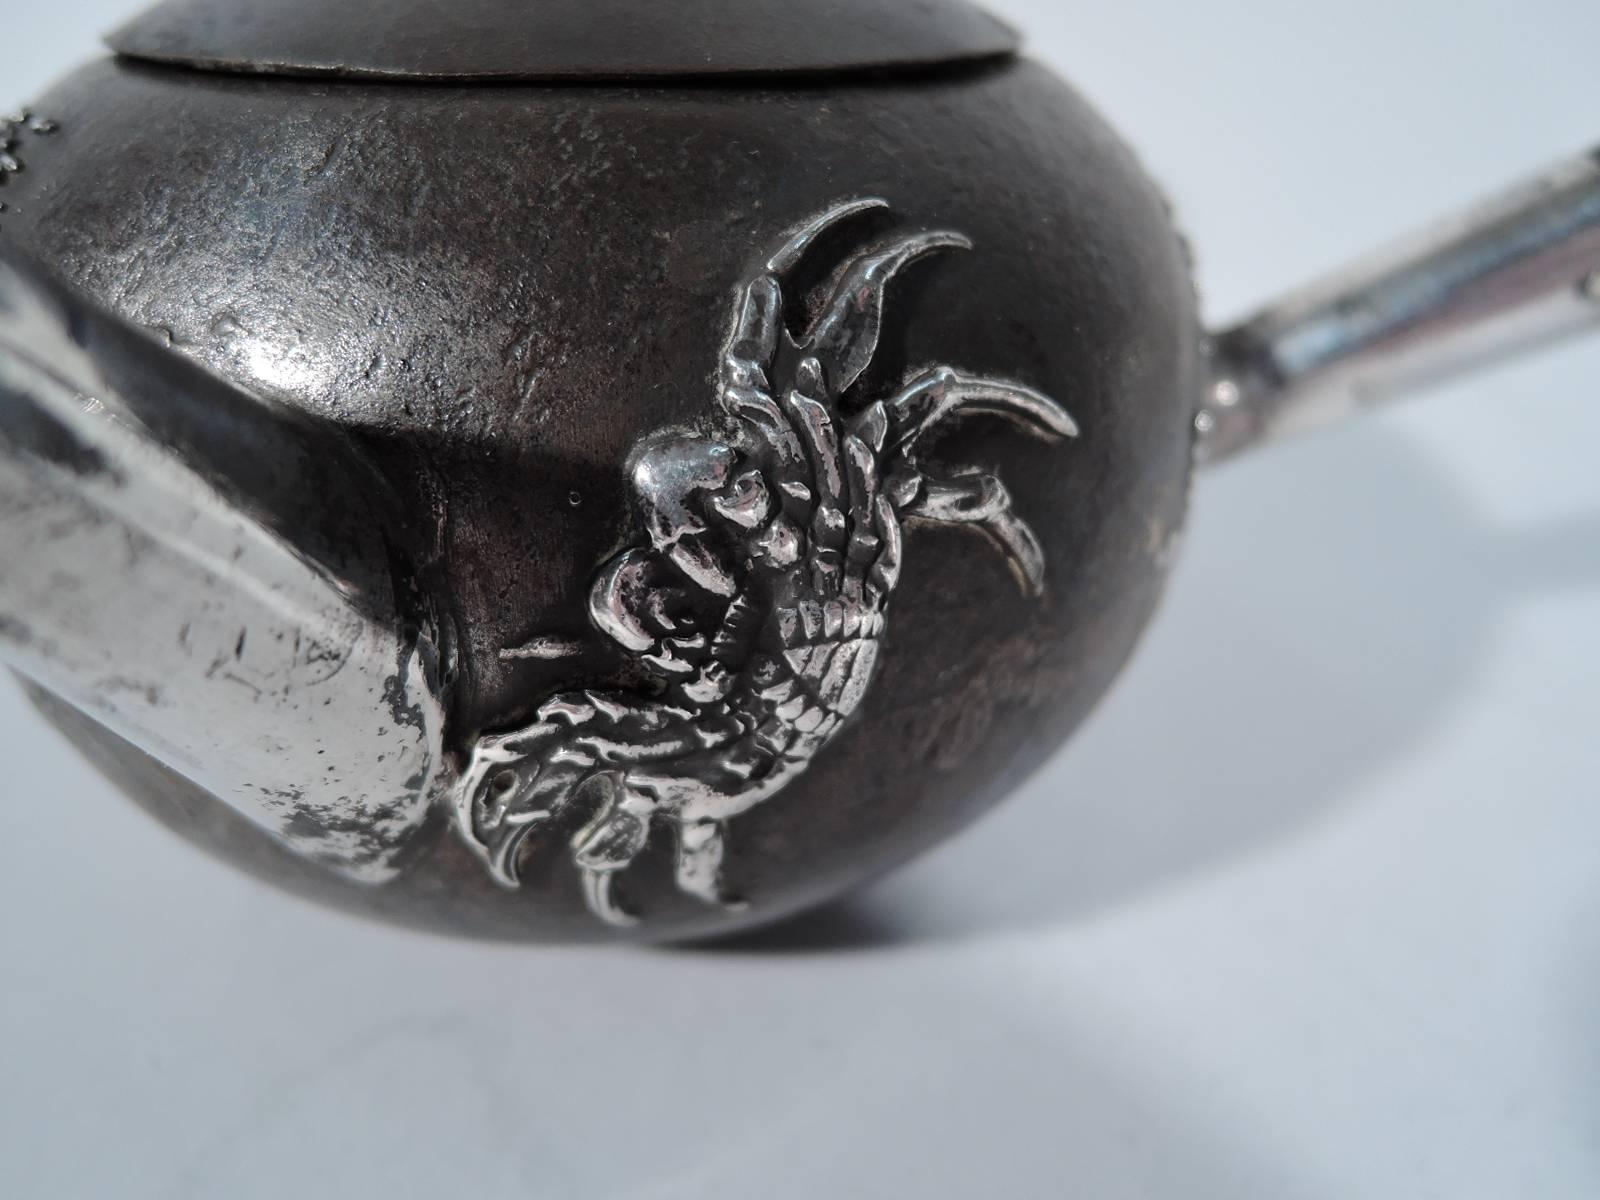 Gorham Japonesque Mixed Metal Iron Sake Pot with Sterling Silver Crabs 2